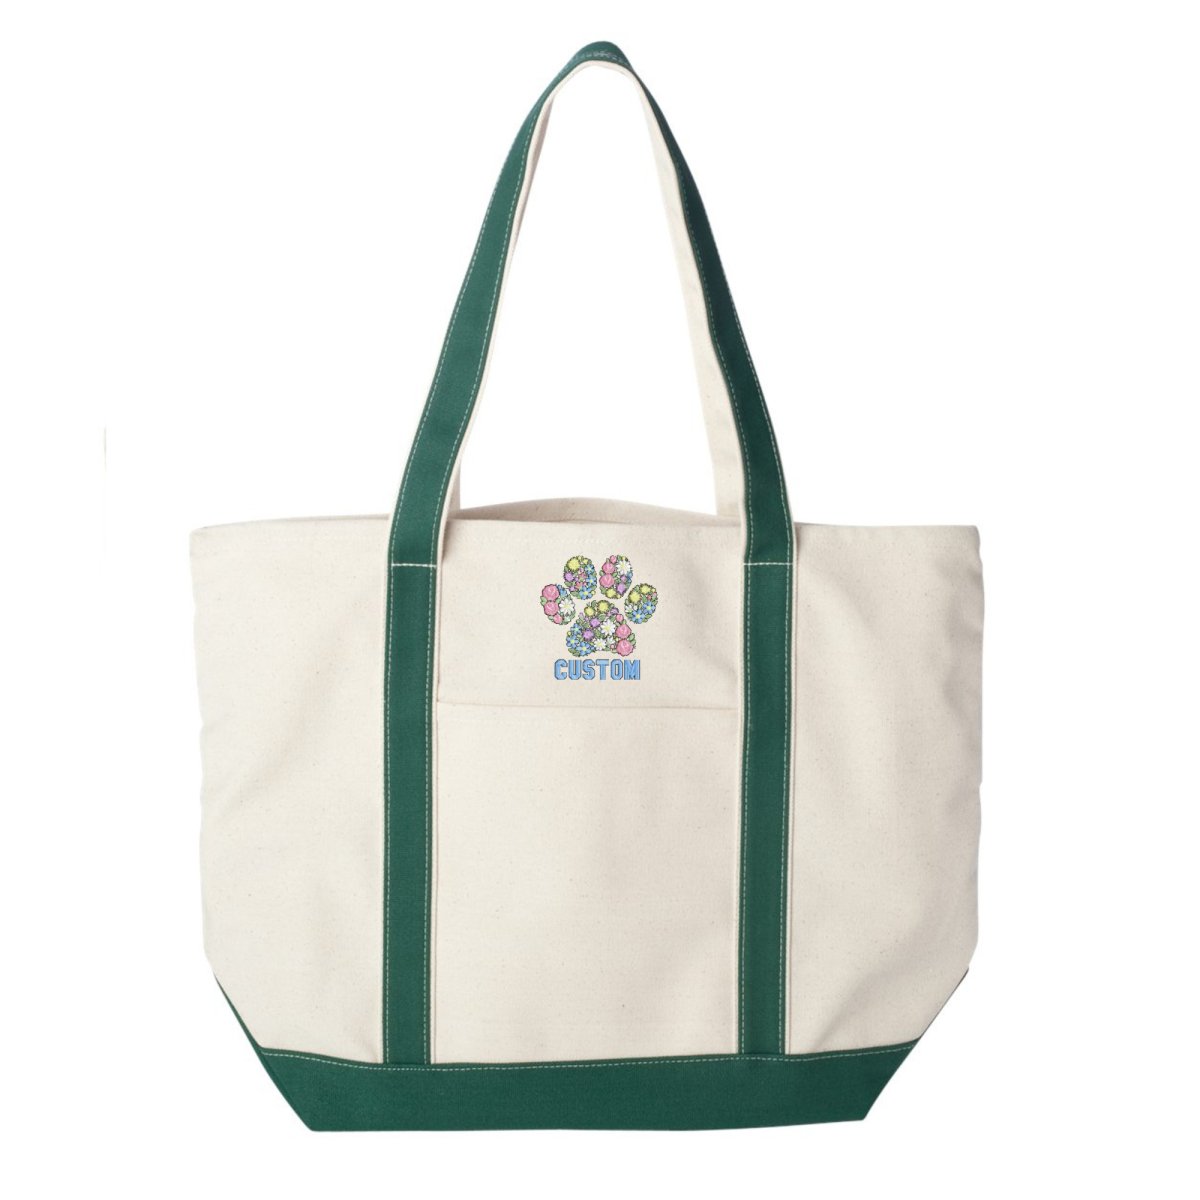 Make It Yours™ 'Floral Paw Print' Canvas Boat Tote - United Monograms